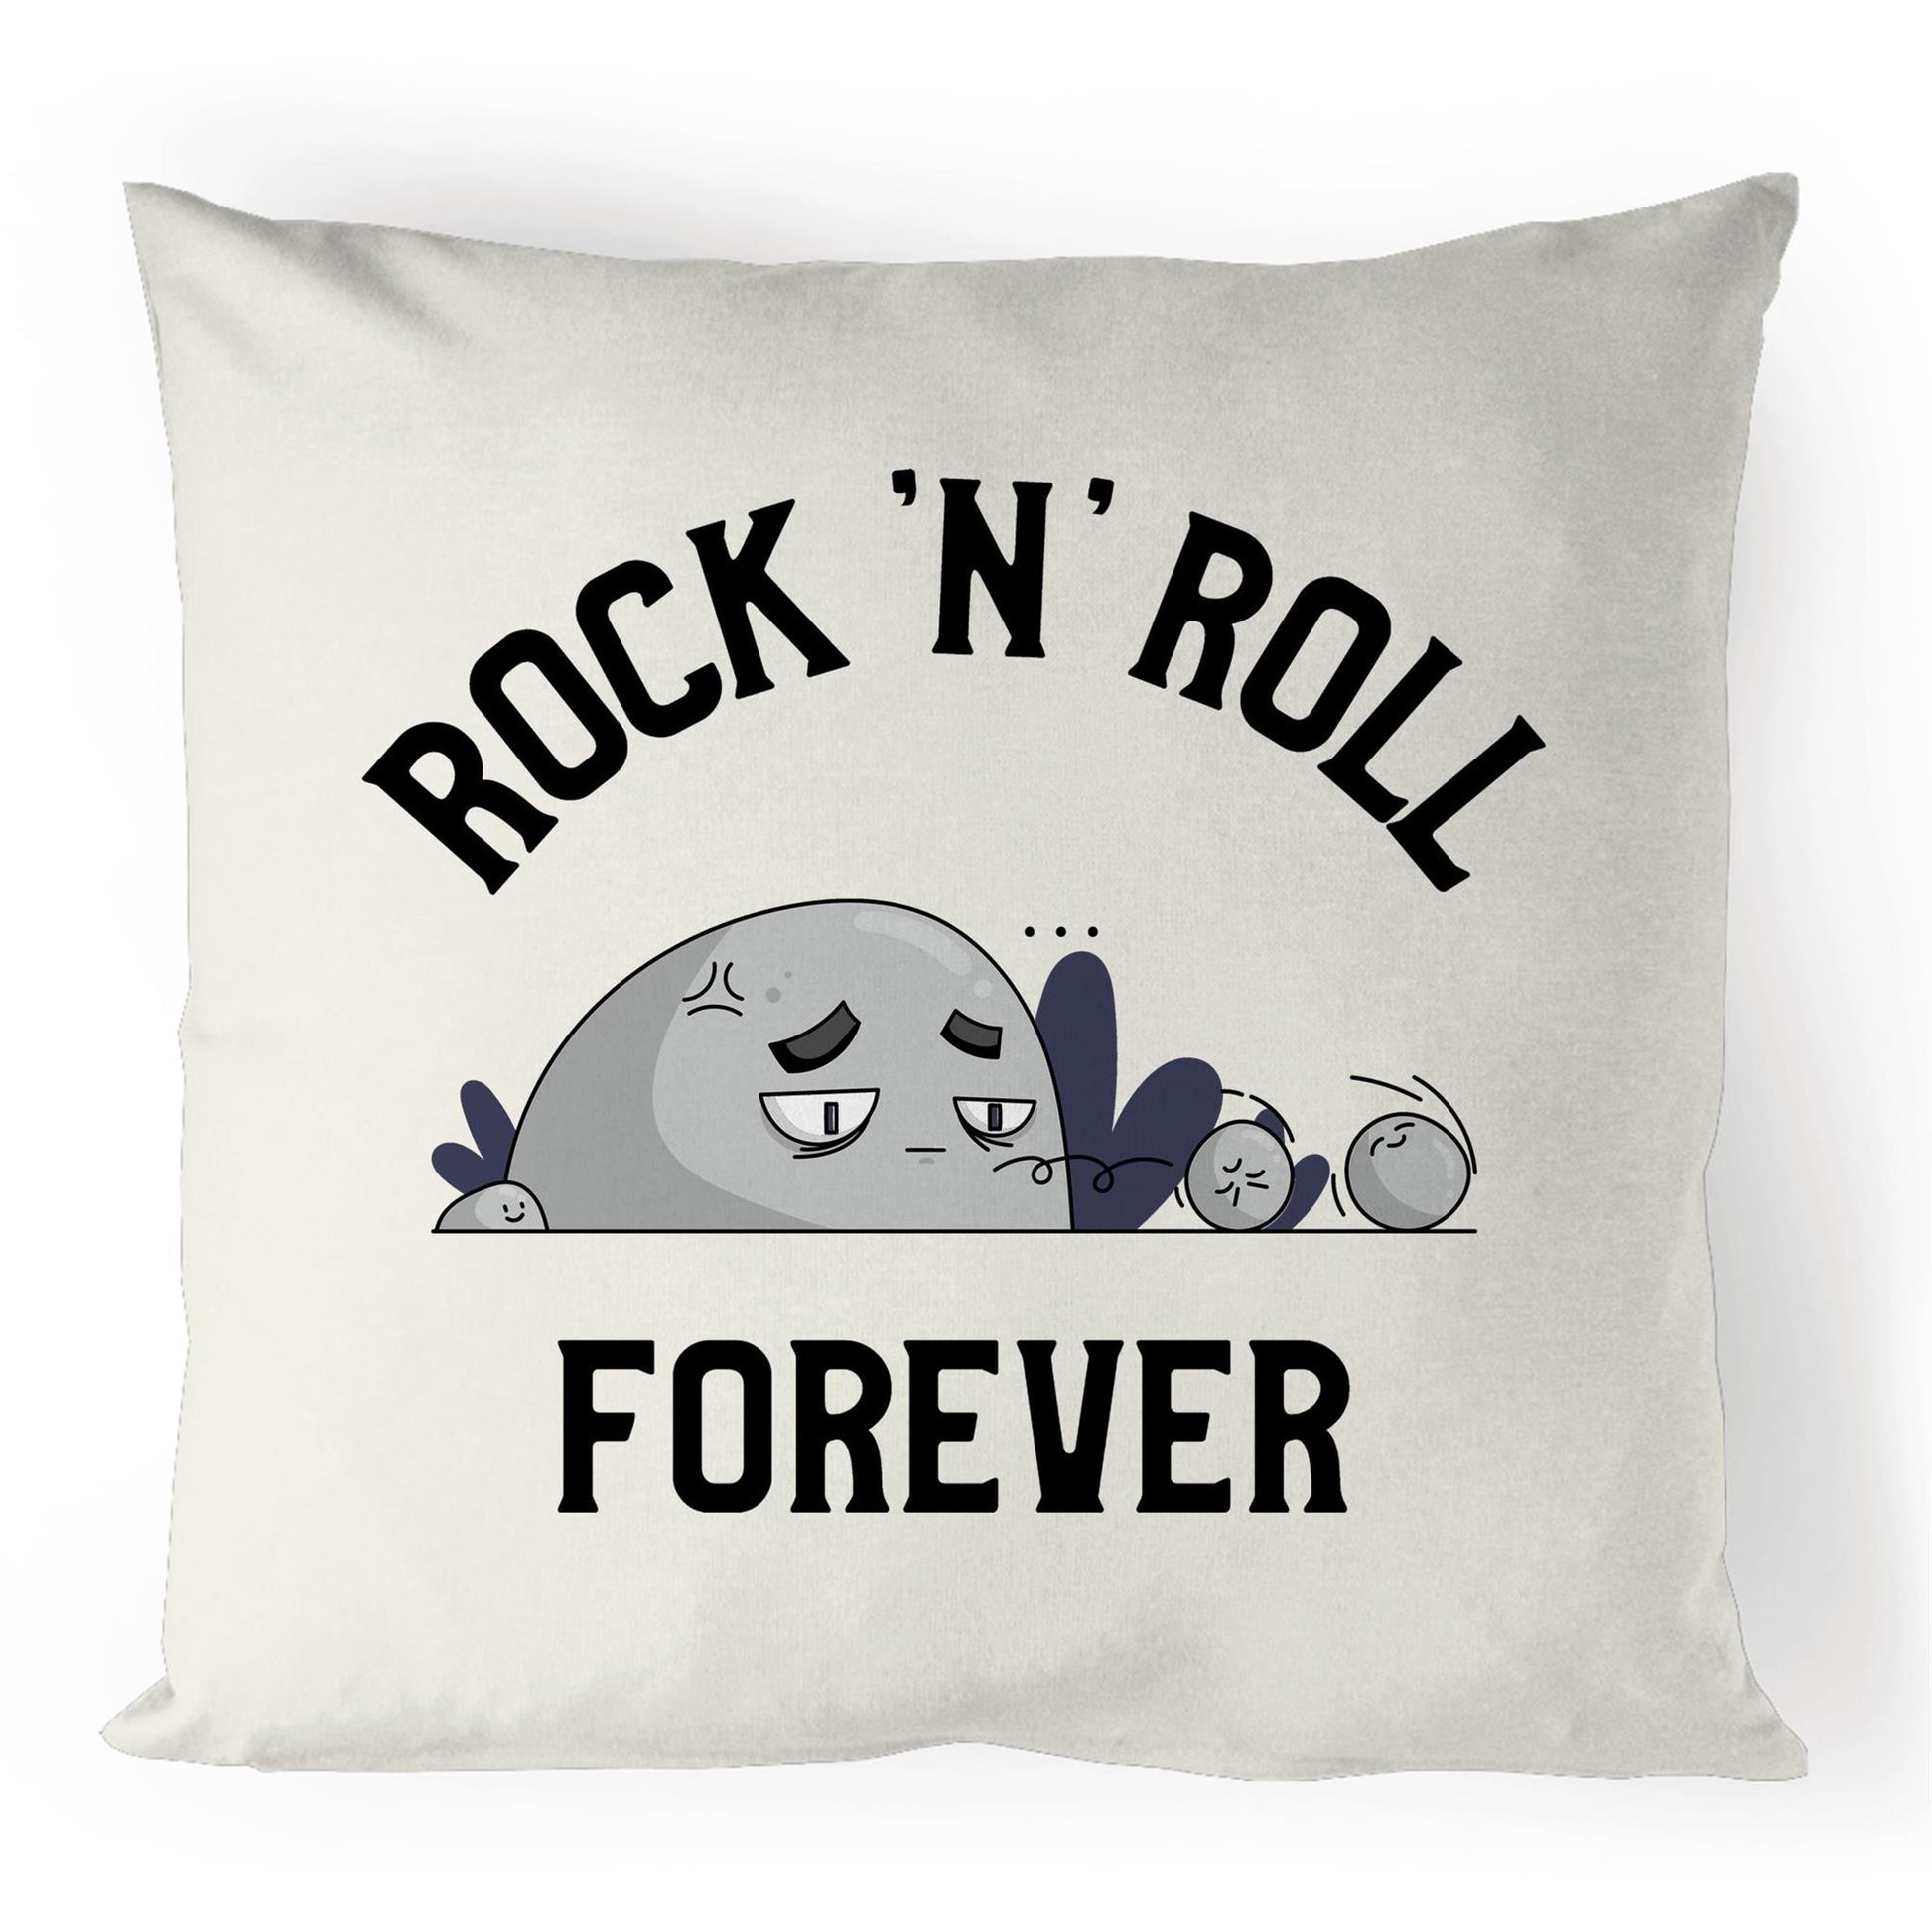 Rock 'N' Roll Forever - 100% Linen Cushion Cover Default Title Linen Cushion Cover Music